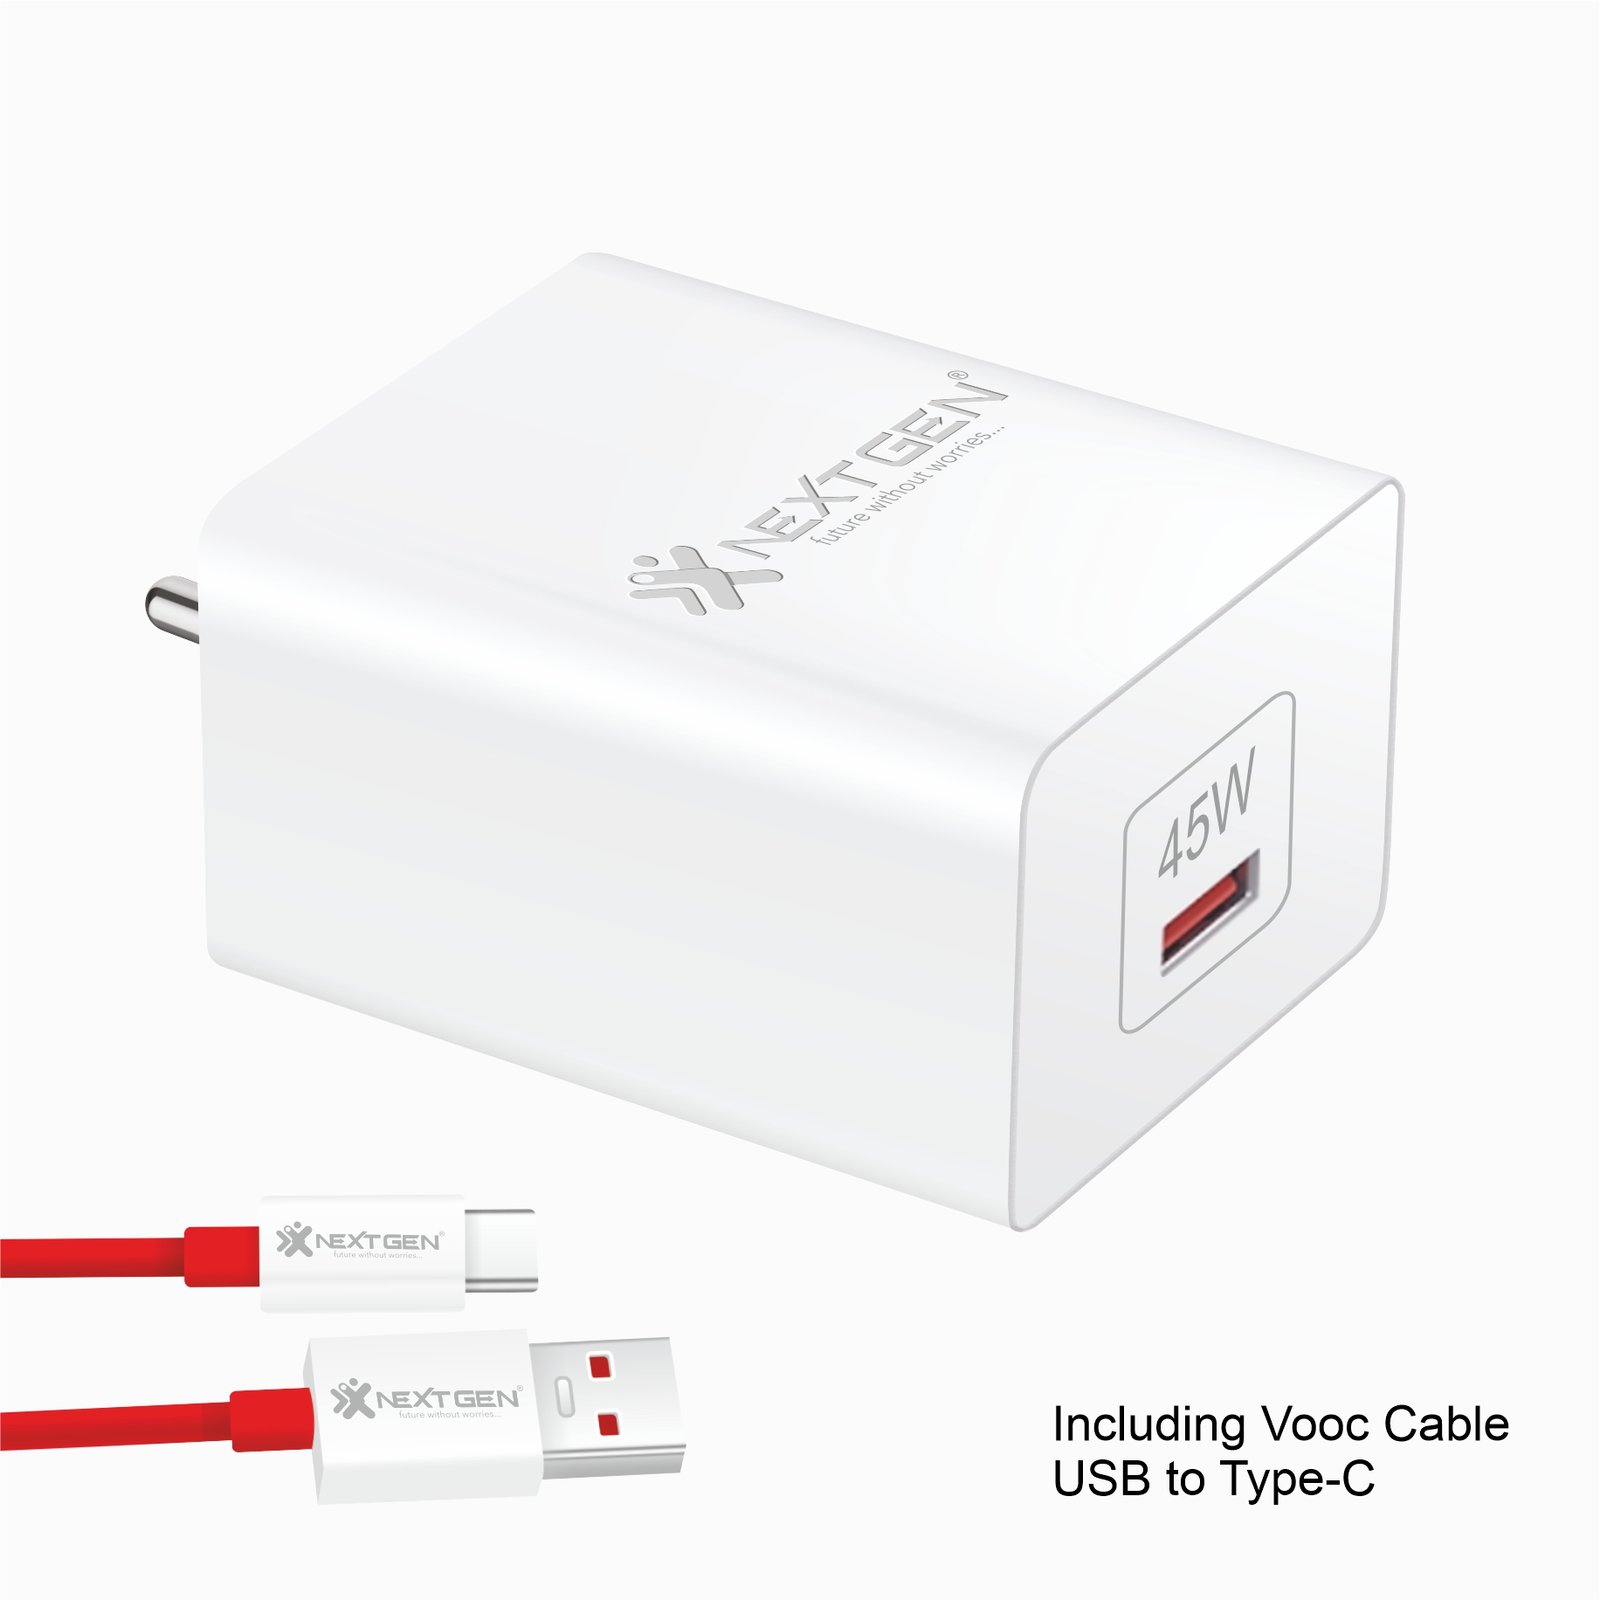 NGCH-210 Vooc All In One Charger